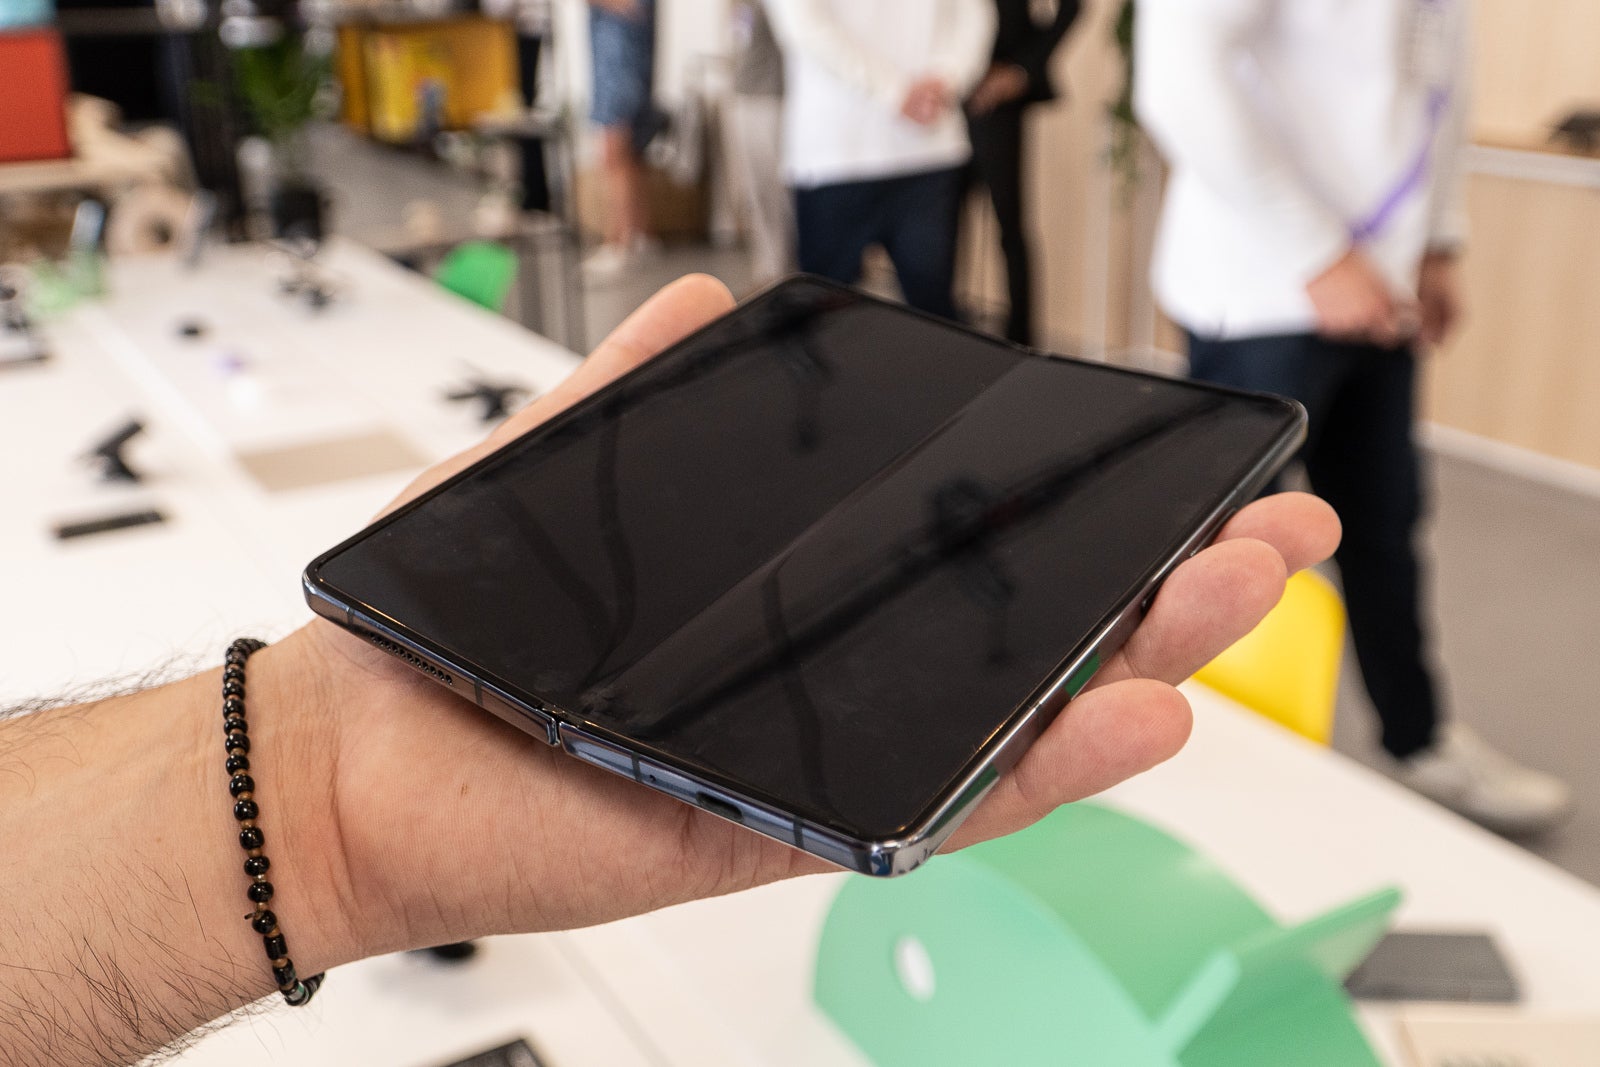 (Image credit - PhoneArena) Galaxy Z Fold 4 - display crease - Samsung Galaxy Z Fold 4 hands-on review